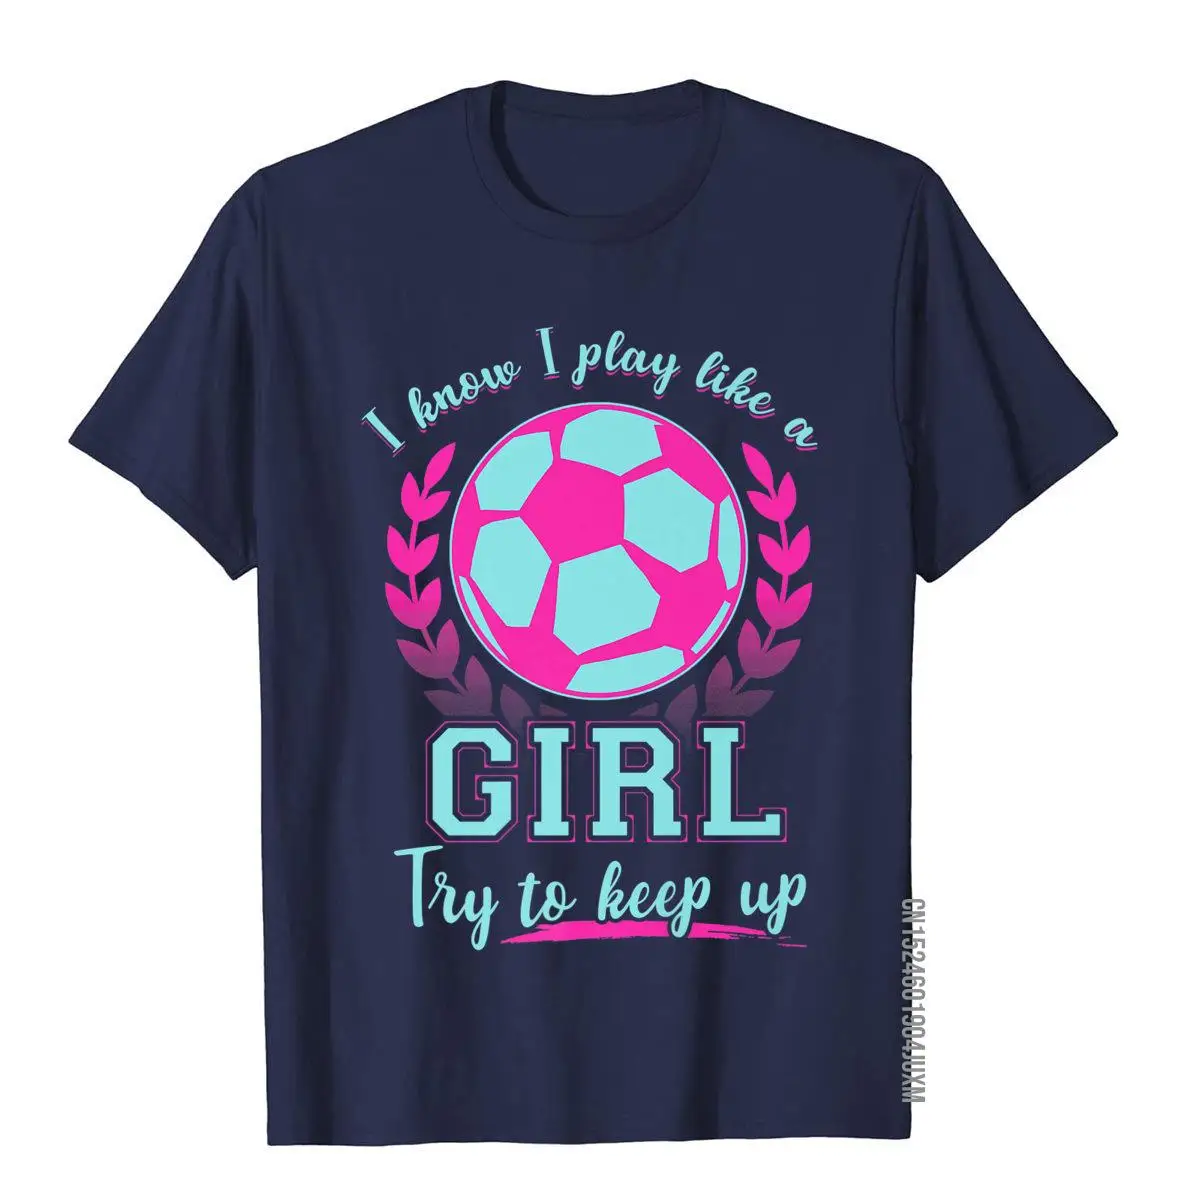 I know I play like a Girl Soccer Shirt Try to keep up__97A1010navy